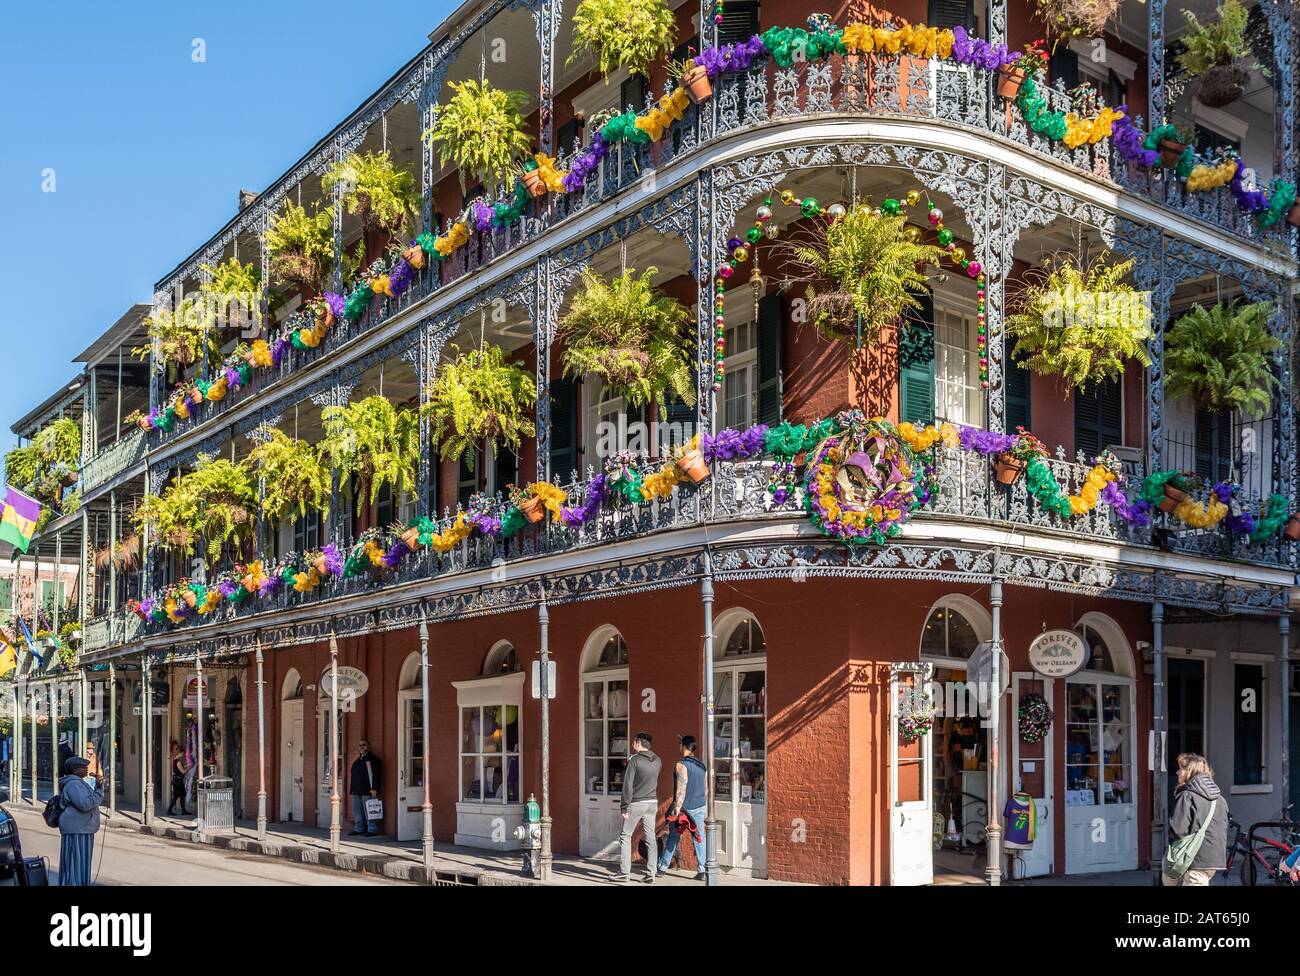 New Orleans French Quarter balcony during Mardi Gras 2020 season, LaBranche House at corner of Royal Street and St. Peter, New Orleans, Louisiana. Stock Photo